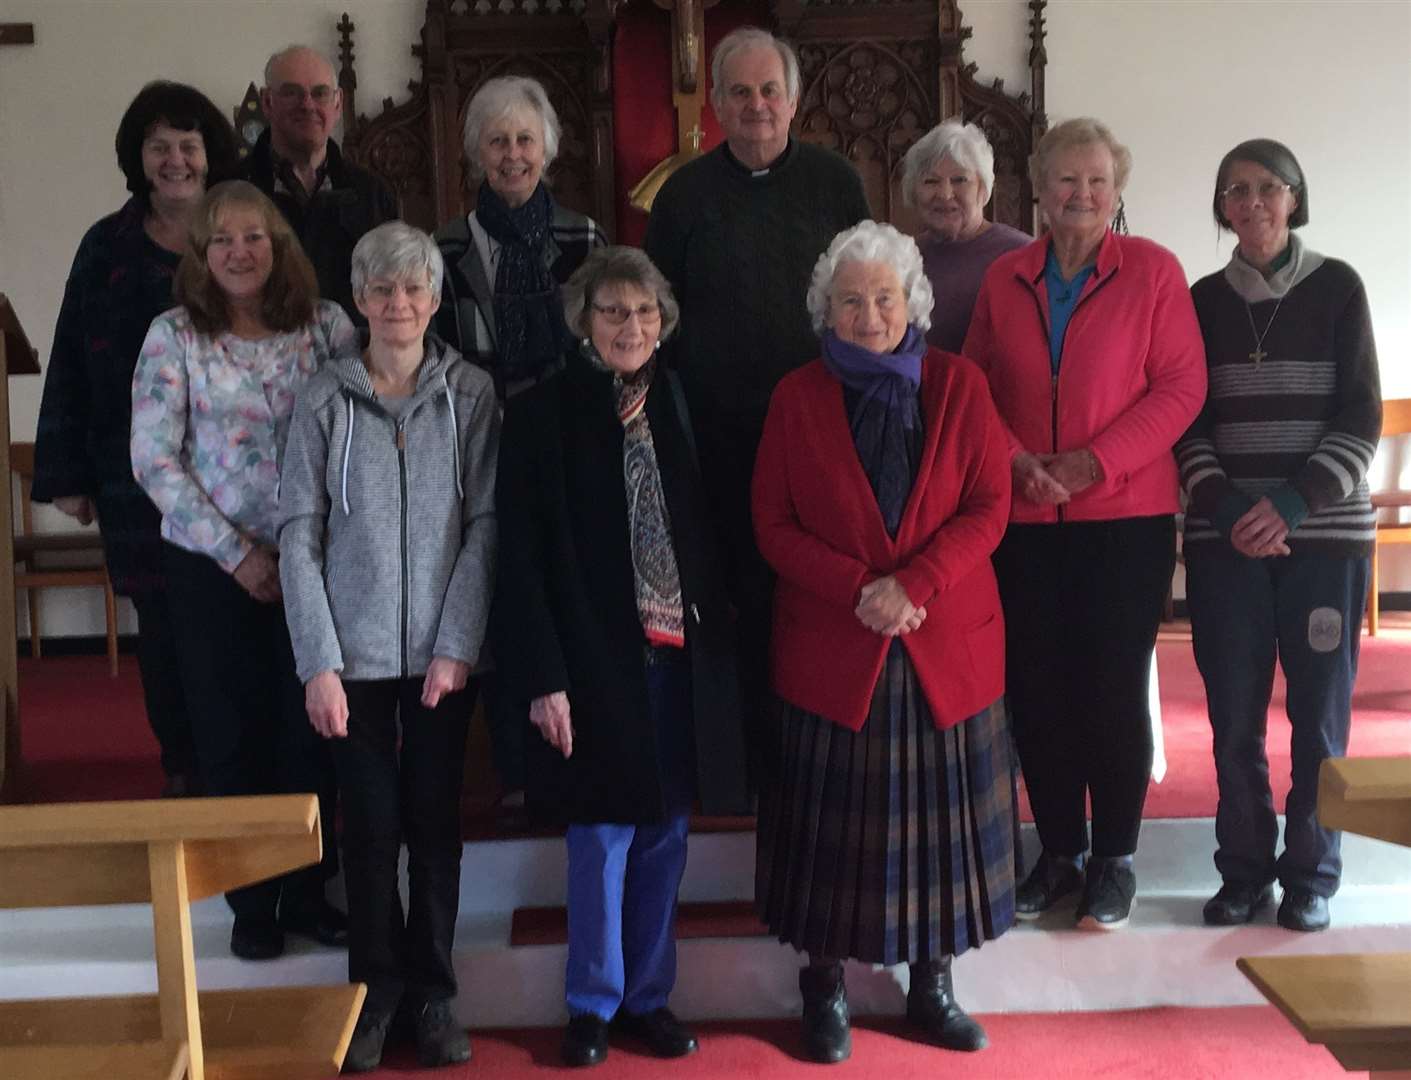 Father Derrick with parishioners and friends in Brora. From left, back: Pauline and Alex Stefaniak, Anne Sutherland, Fr Derrick, Christine Port. Middle: Margaret Bray, Jackie Wilkinson, Sister Anne Marie Farasyn. Front: Mary Donald, Sheila Broad and Mary Bromage.